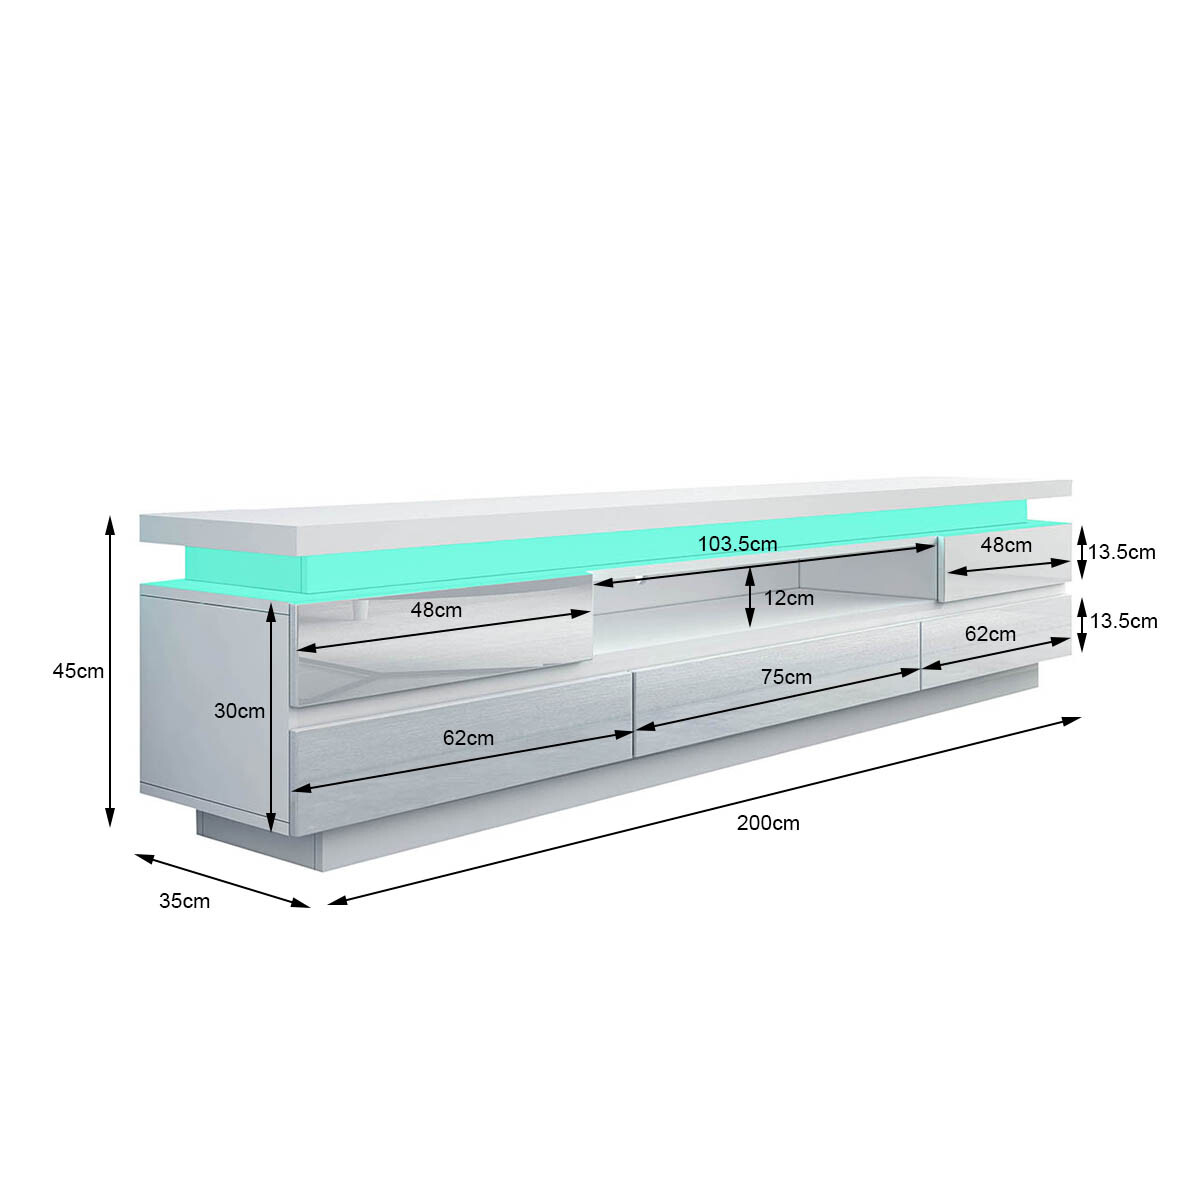 Five-Drawer LED TV Console Table - Two Colours Available